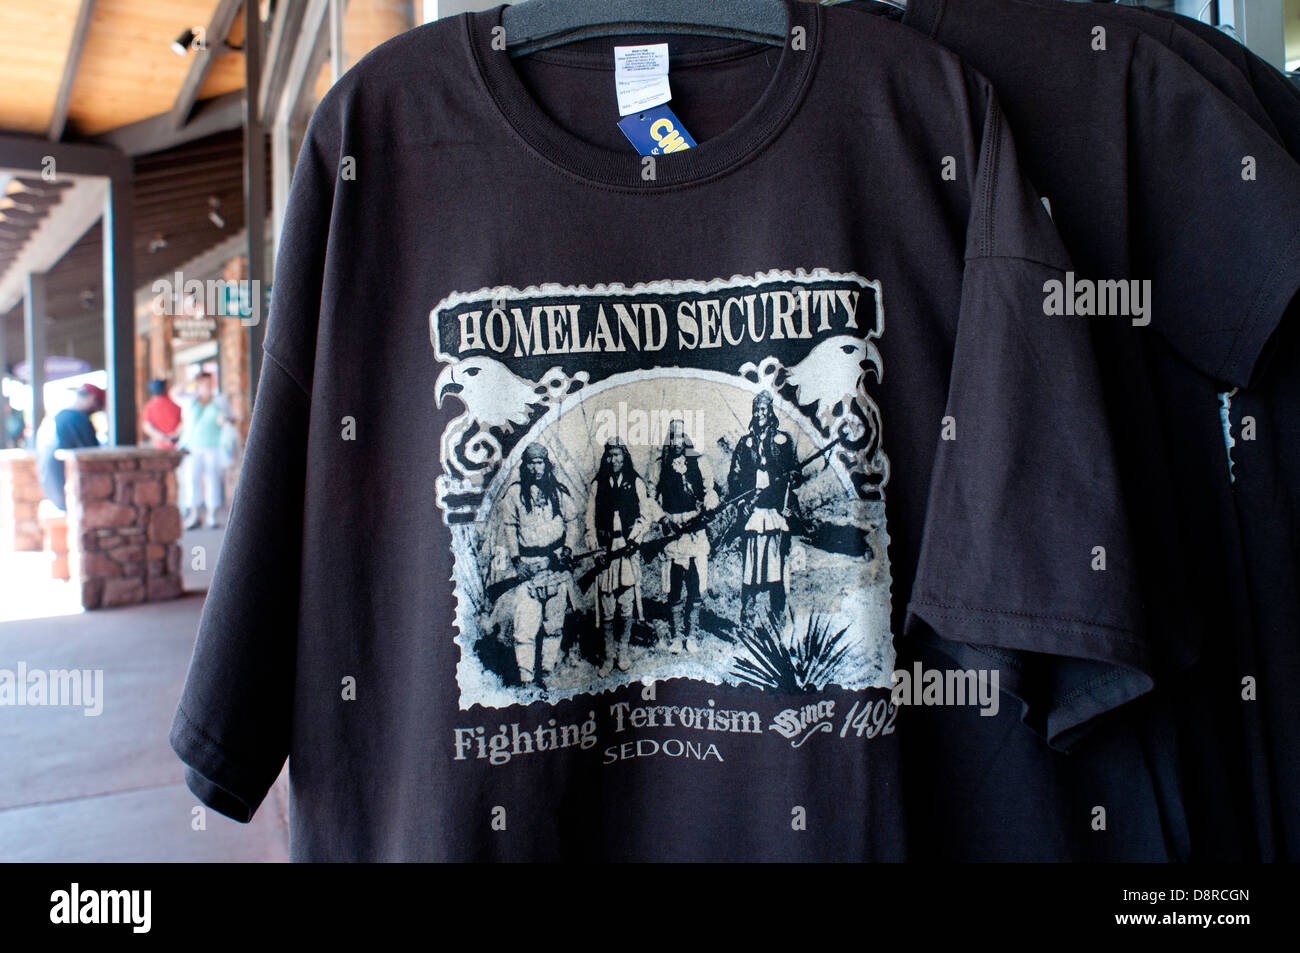 T-shirt mocking the US government's Homeland Security policy. Stock Photo